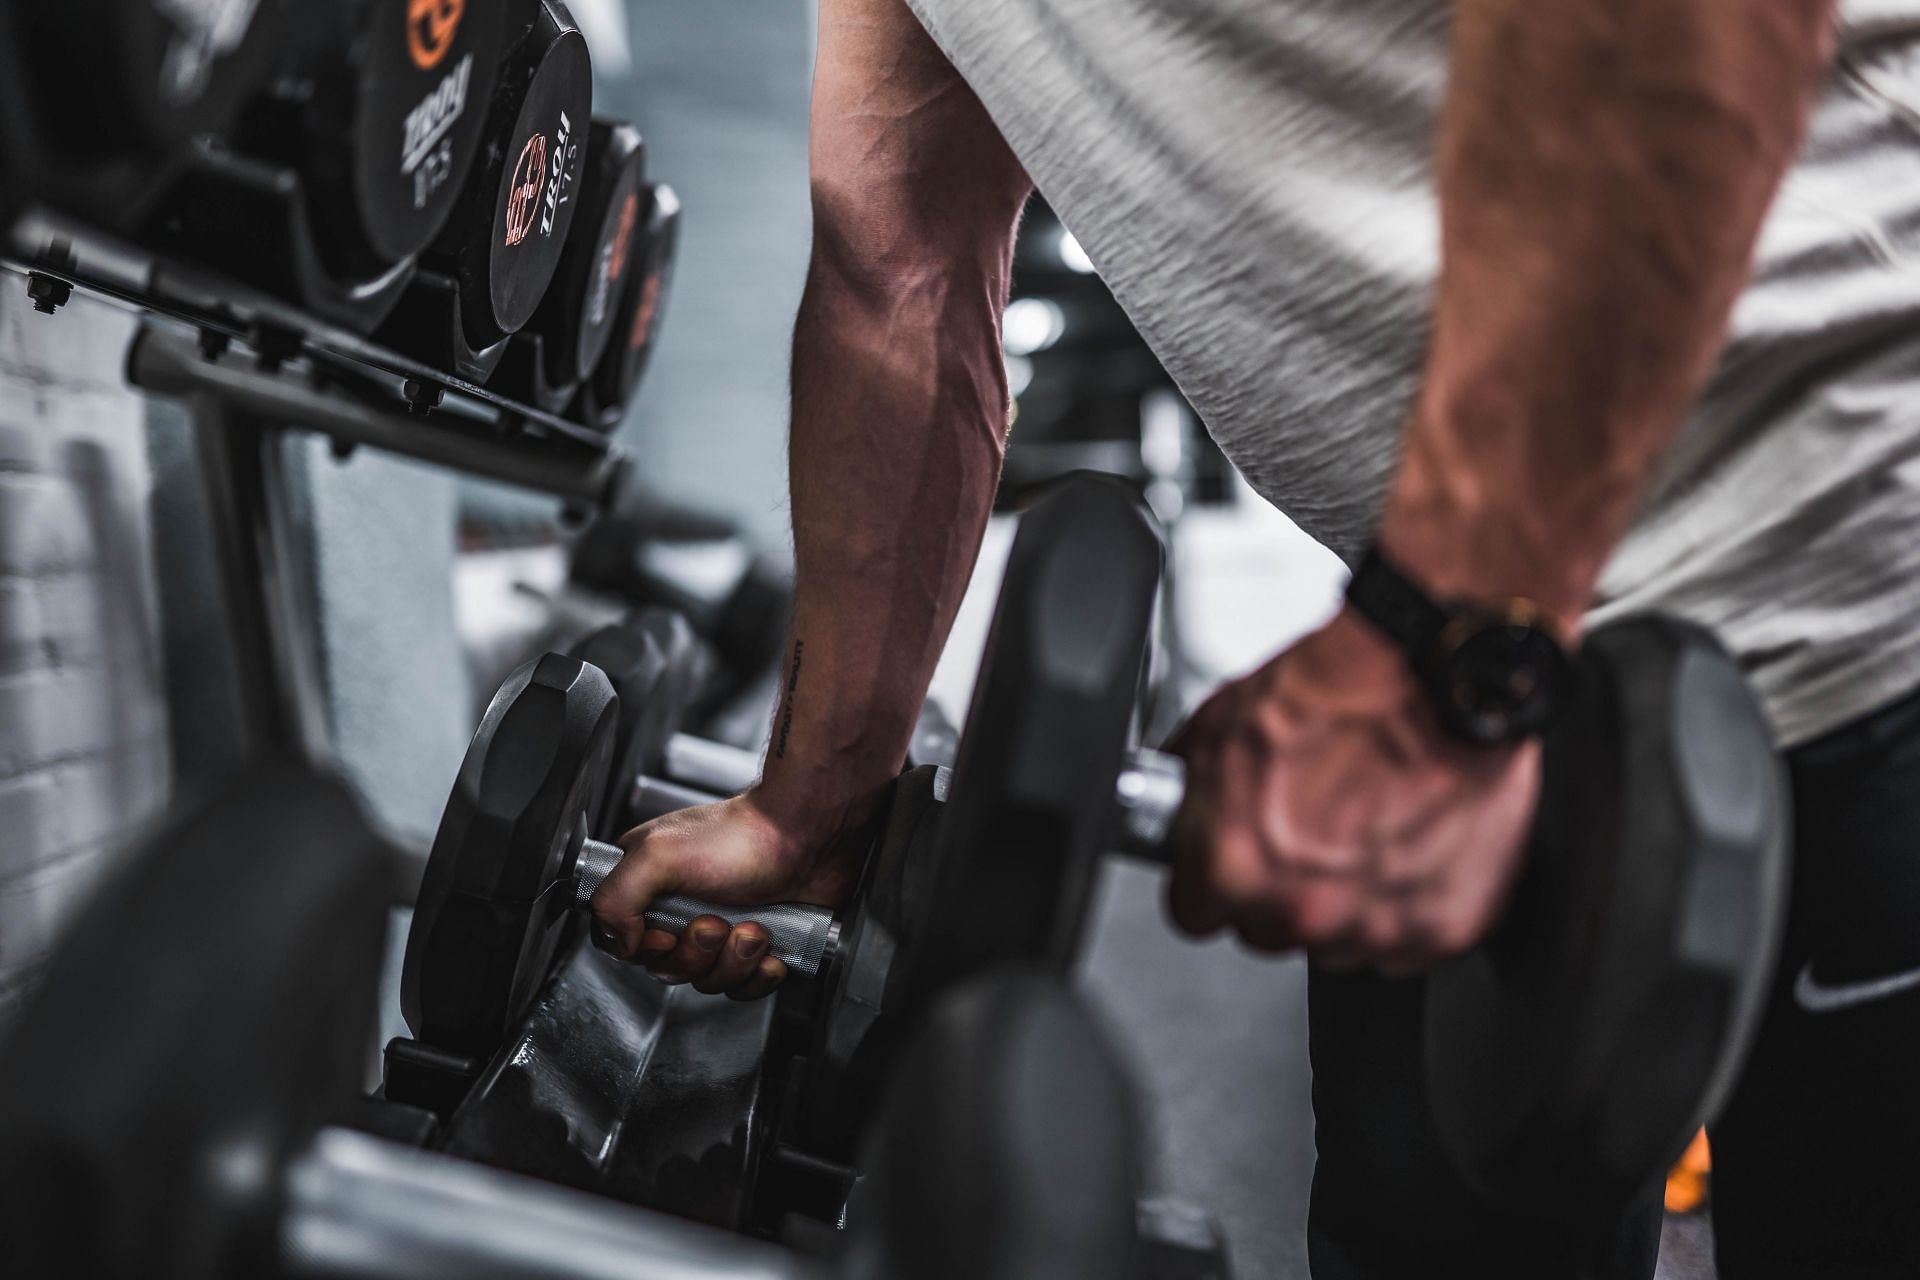 Incorporate weight training in your workout for better athletic ability and balance. (Image via Unsplash/Anastase Maragose)